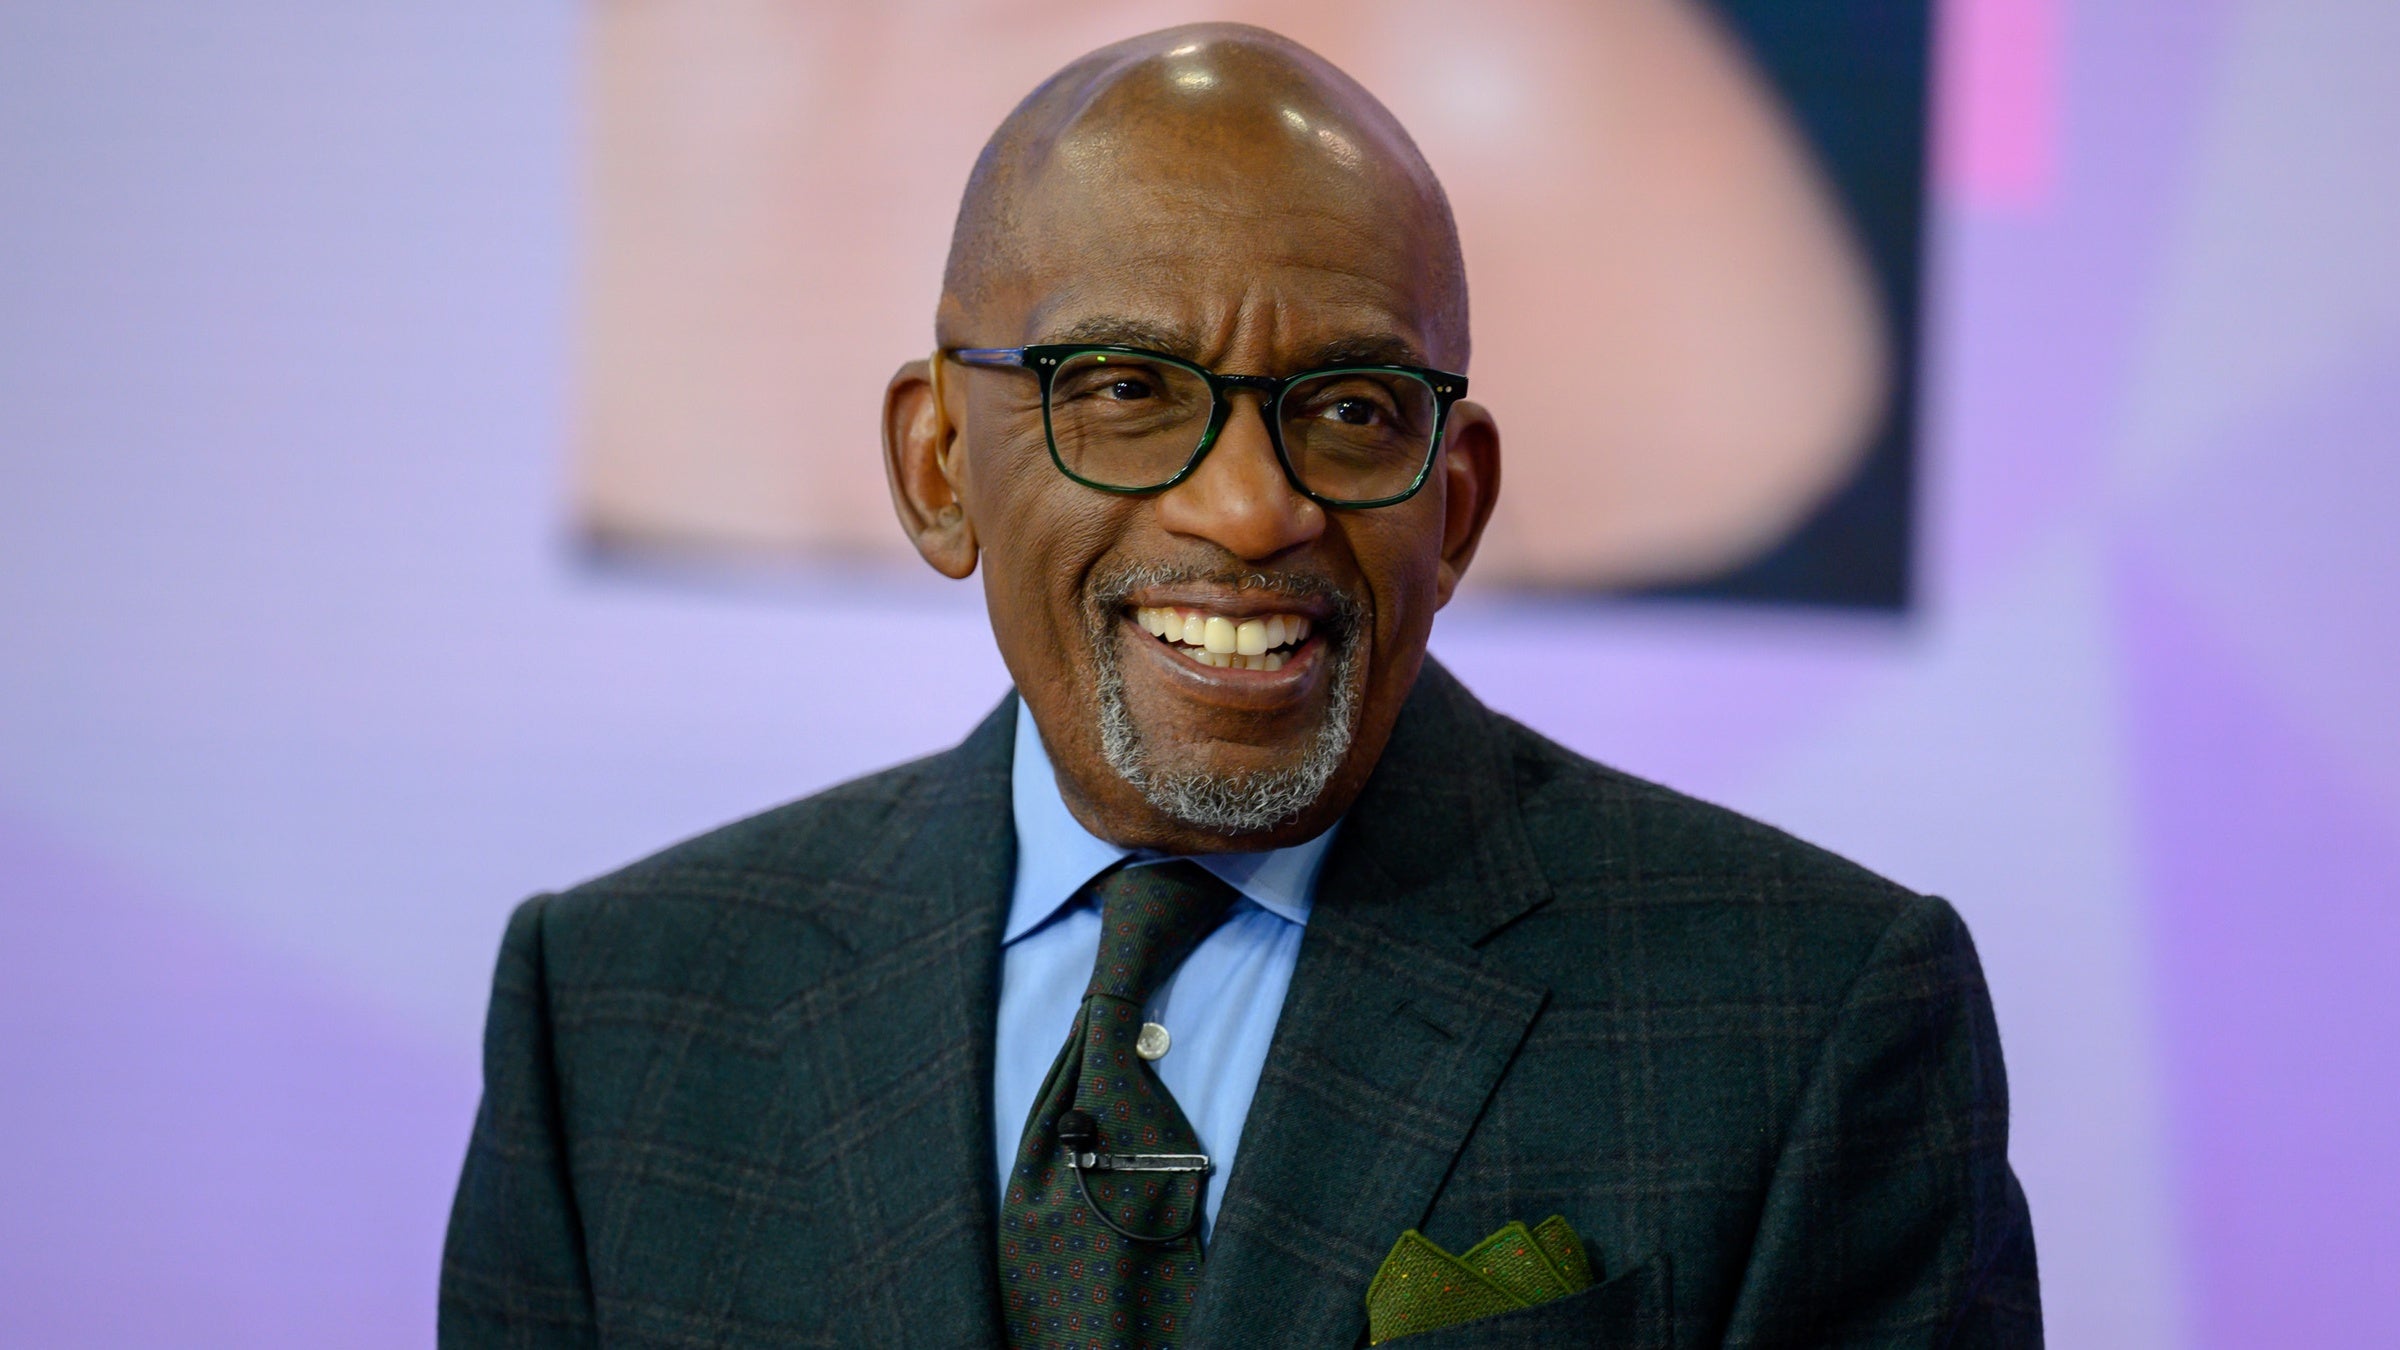 Al Roker Recovers After Being Hospitalized For Blood Clots In His Leg And Lungs